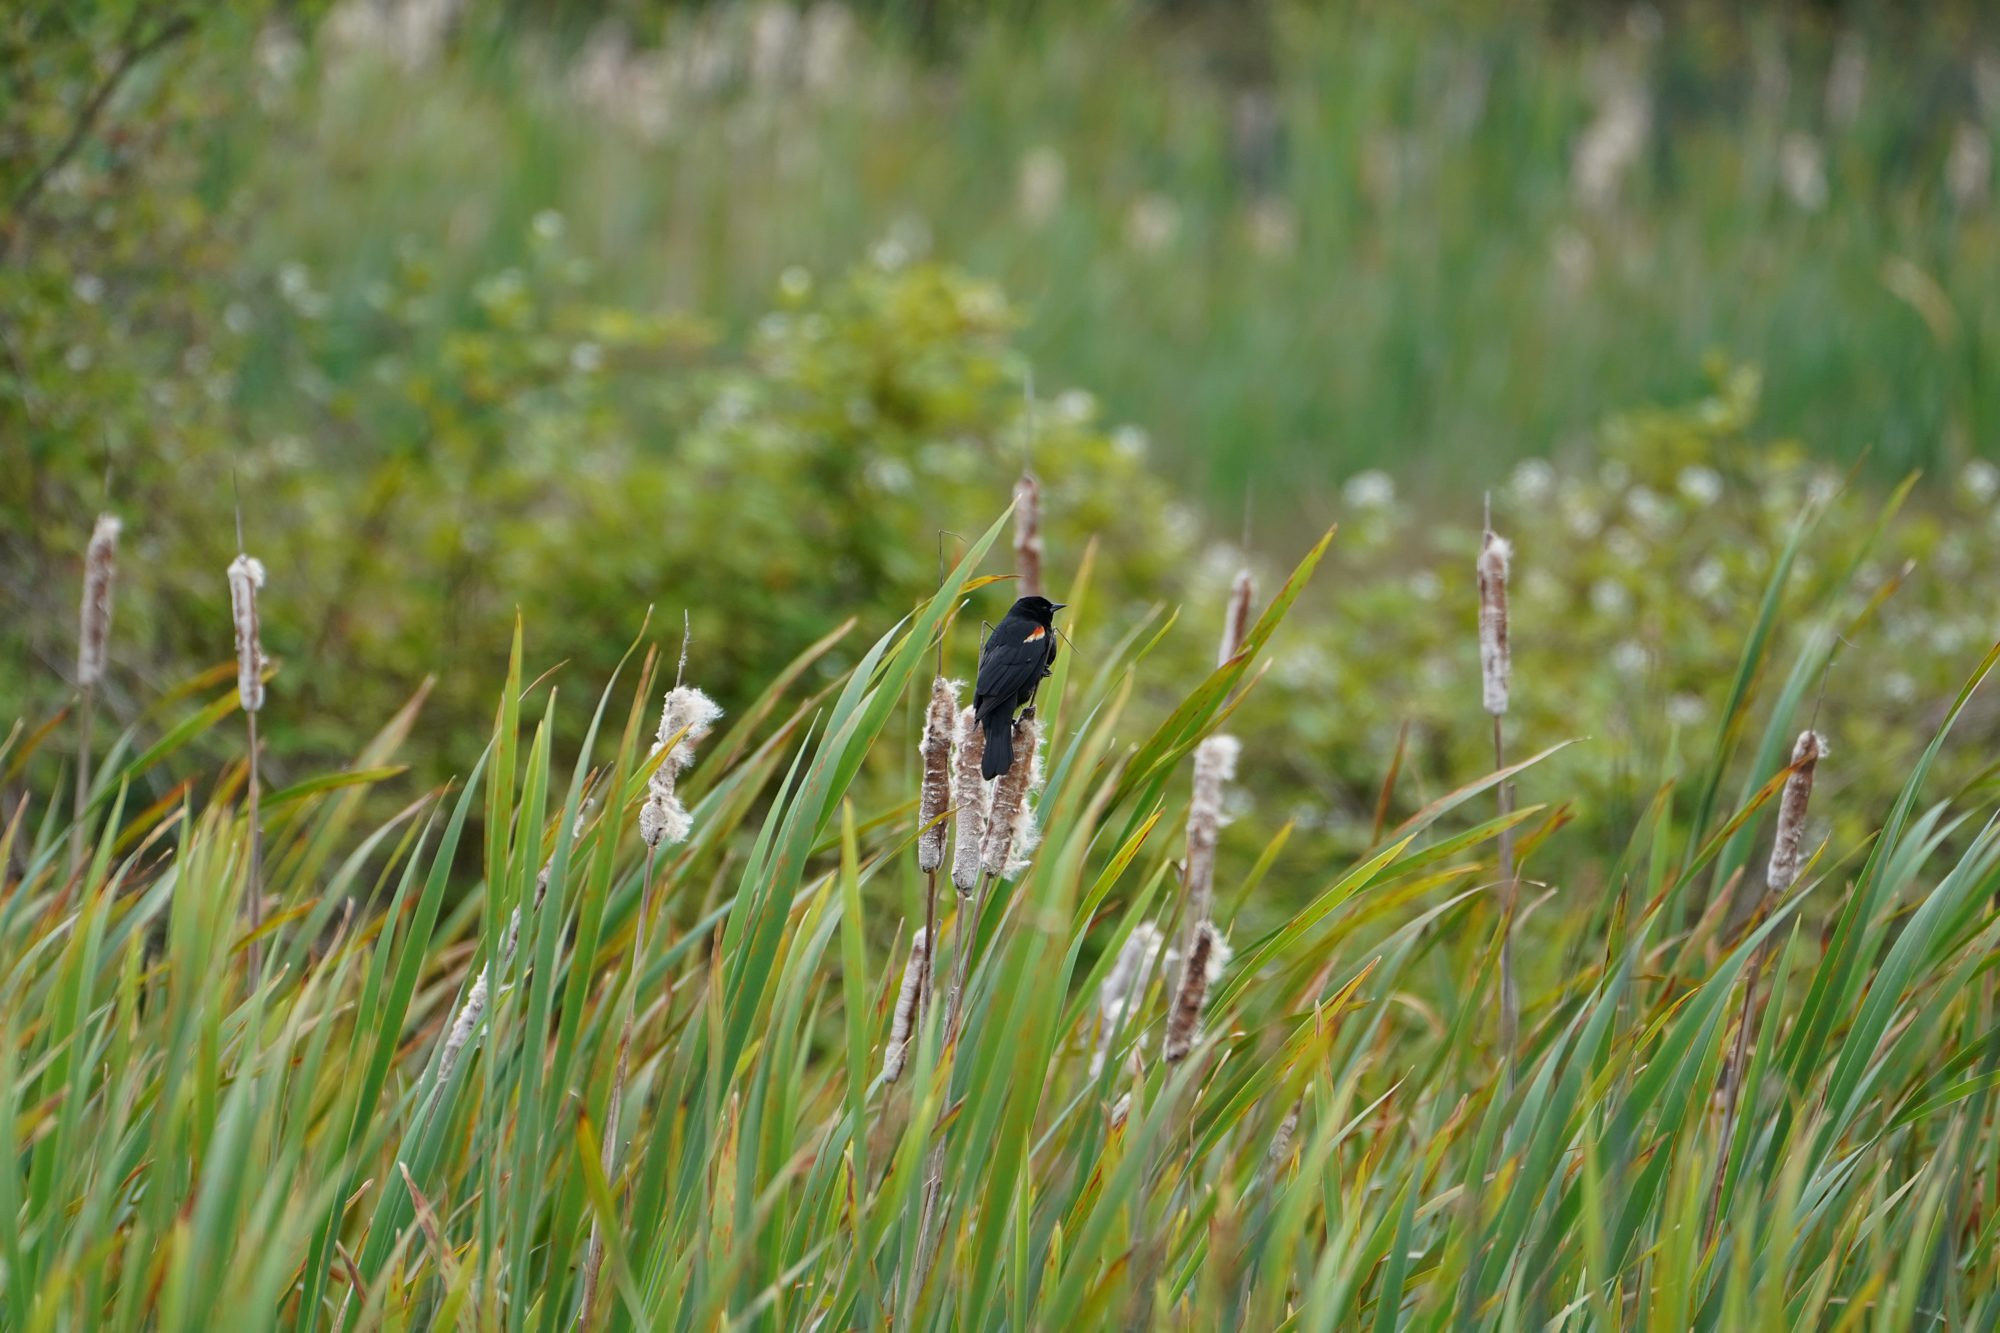 A male Red-winged Blackbird resting among the reeds